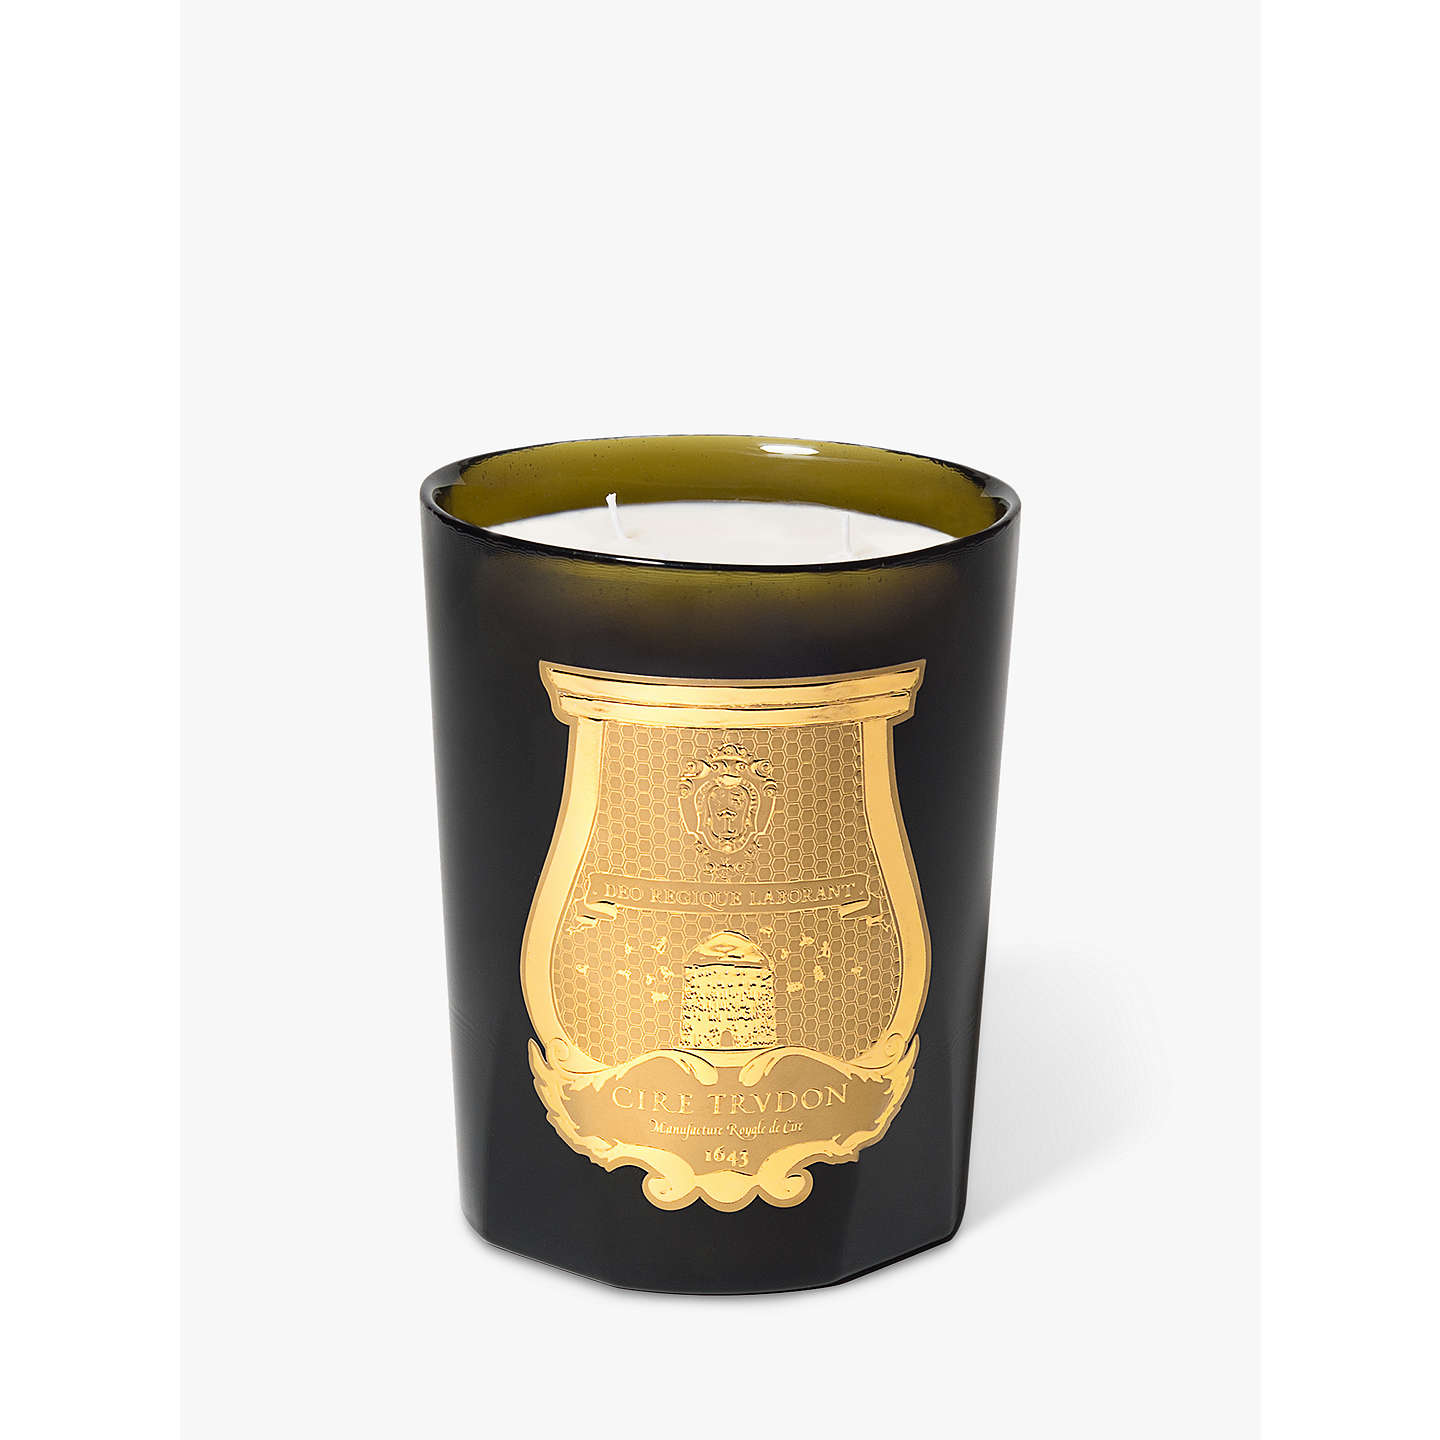 Cire Trudon Ernesto Scented Candle, 800g at John Lewis